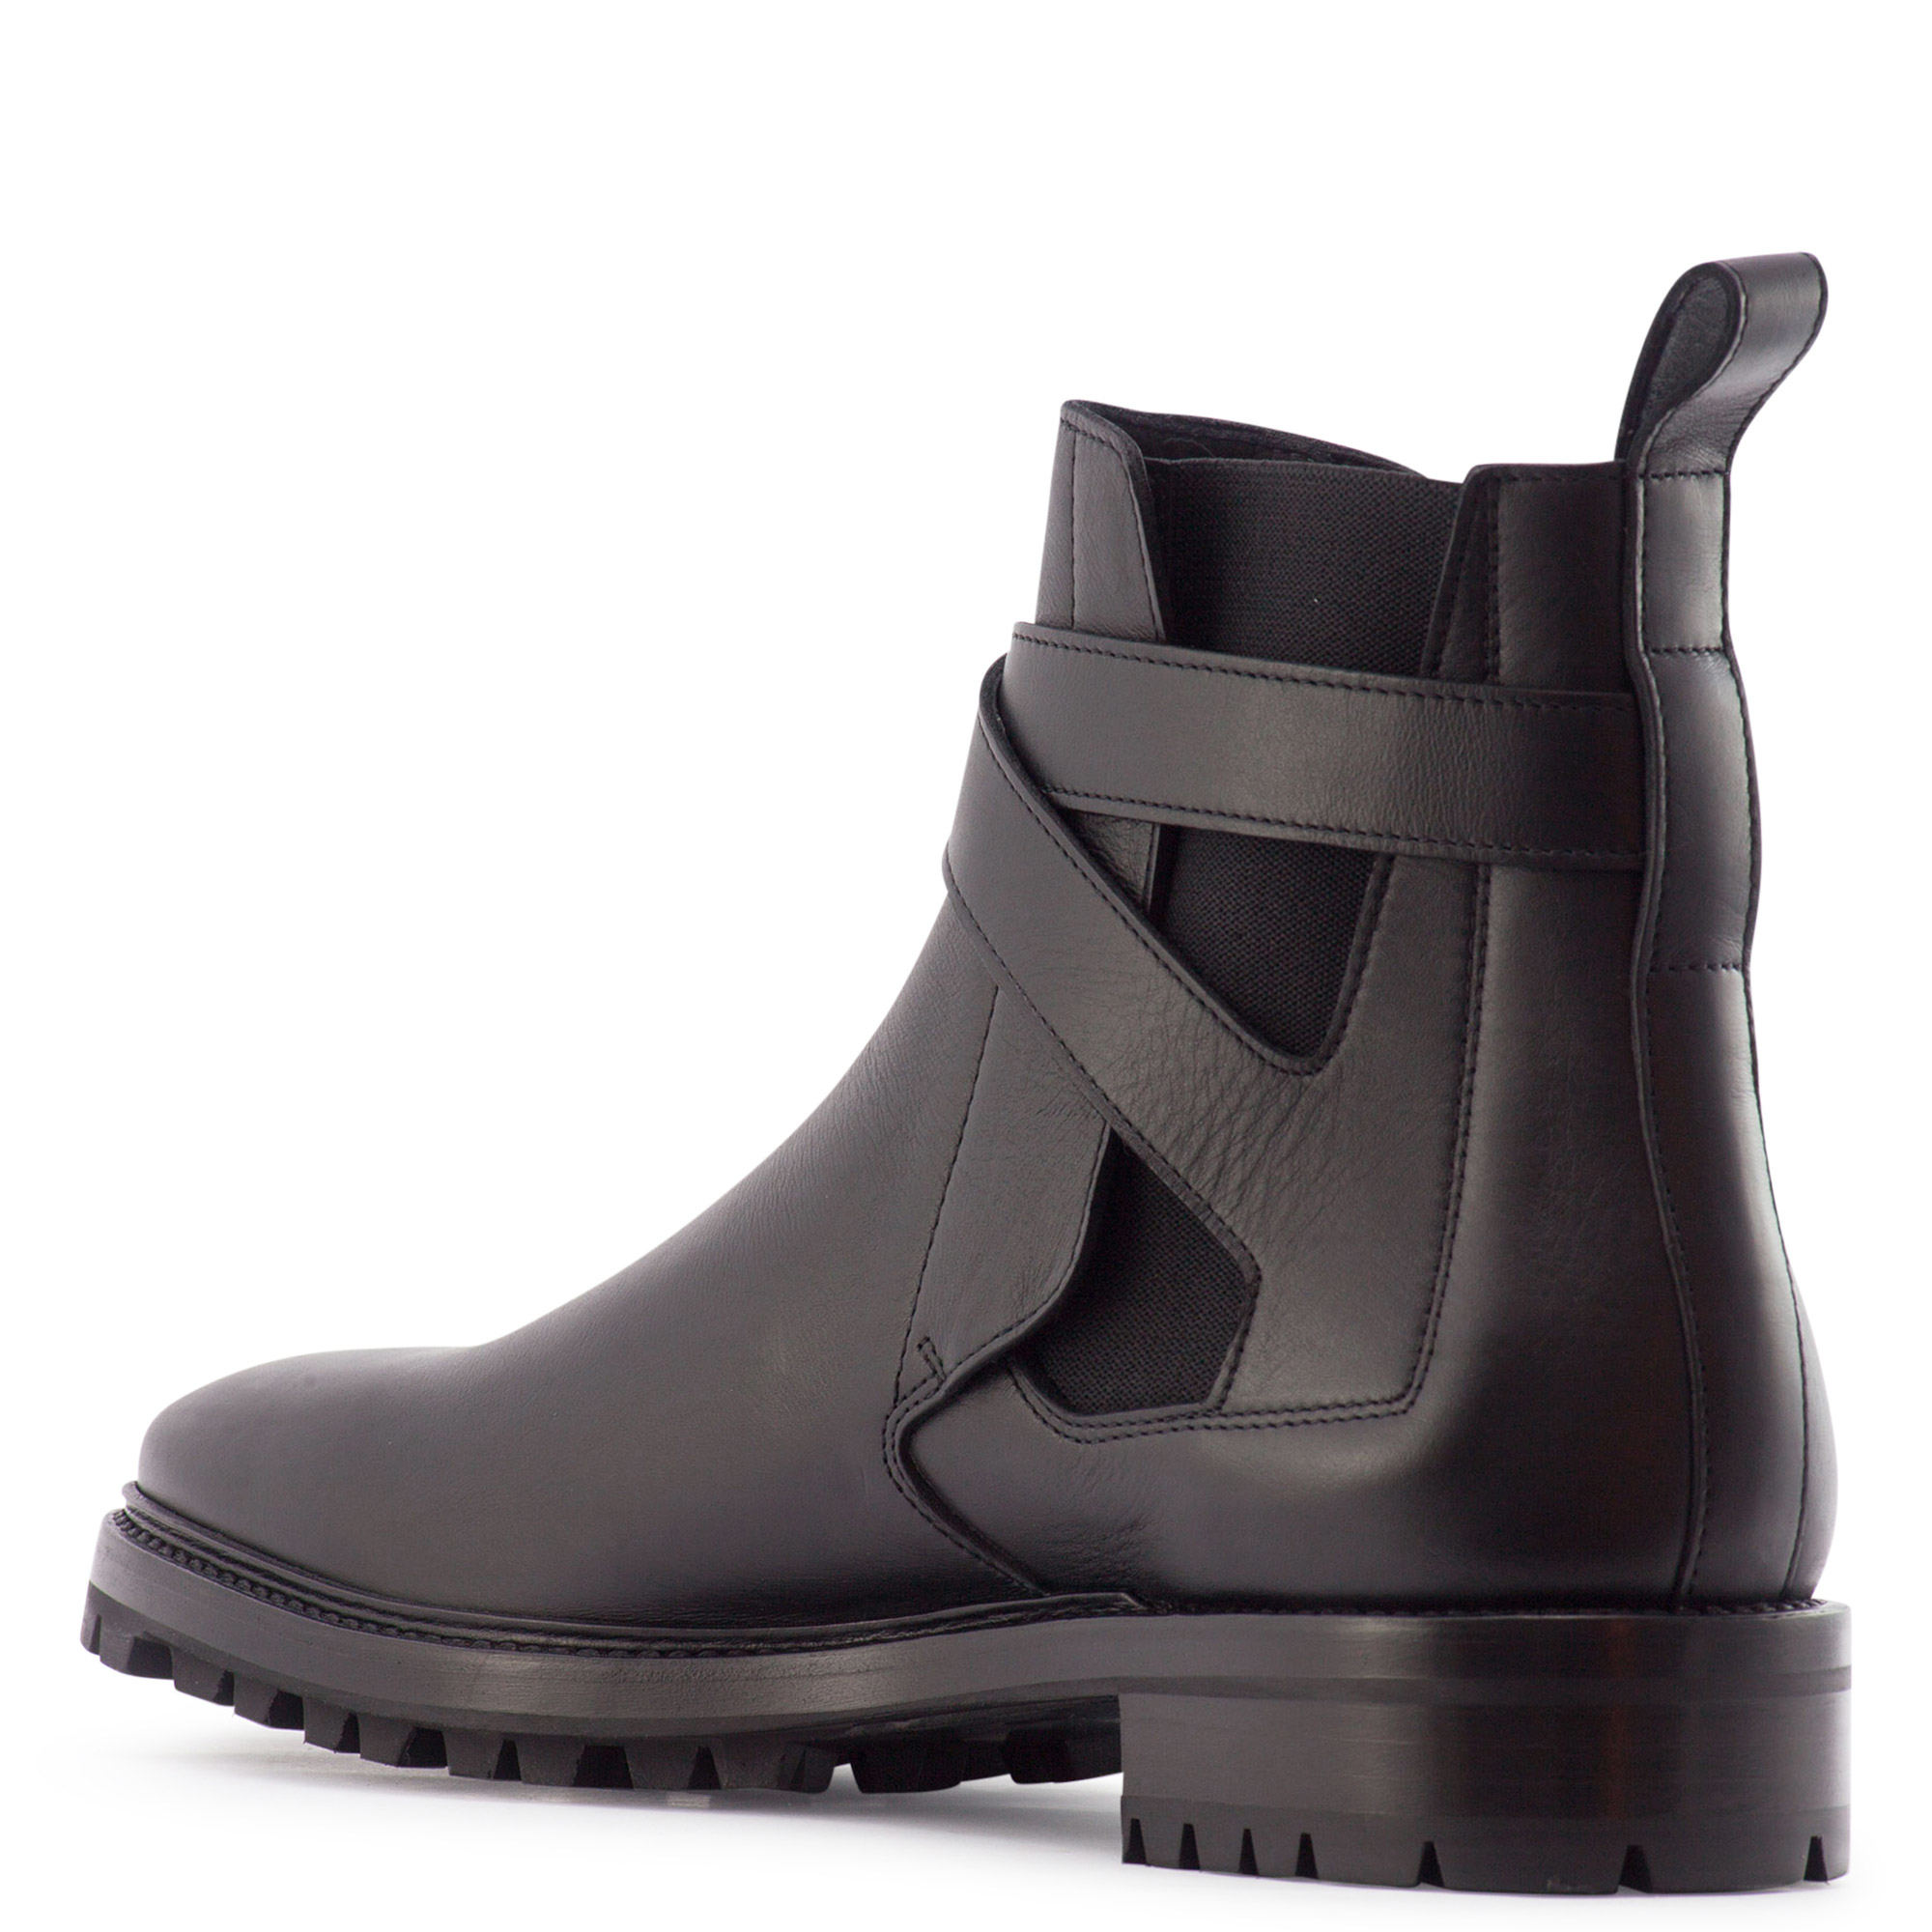 Lanvin Leather Ankle Boots in Black for Men - Lyst